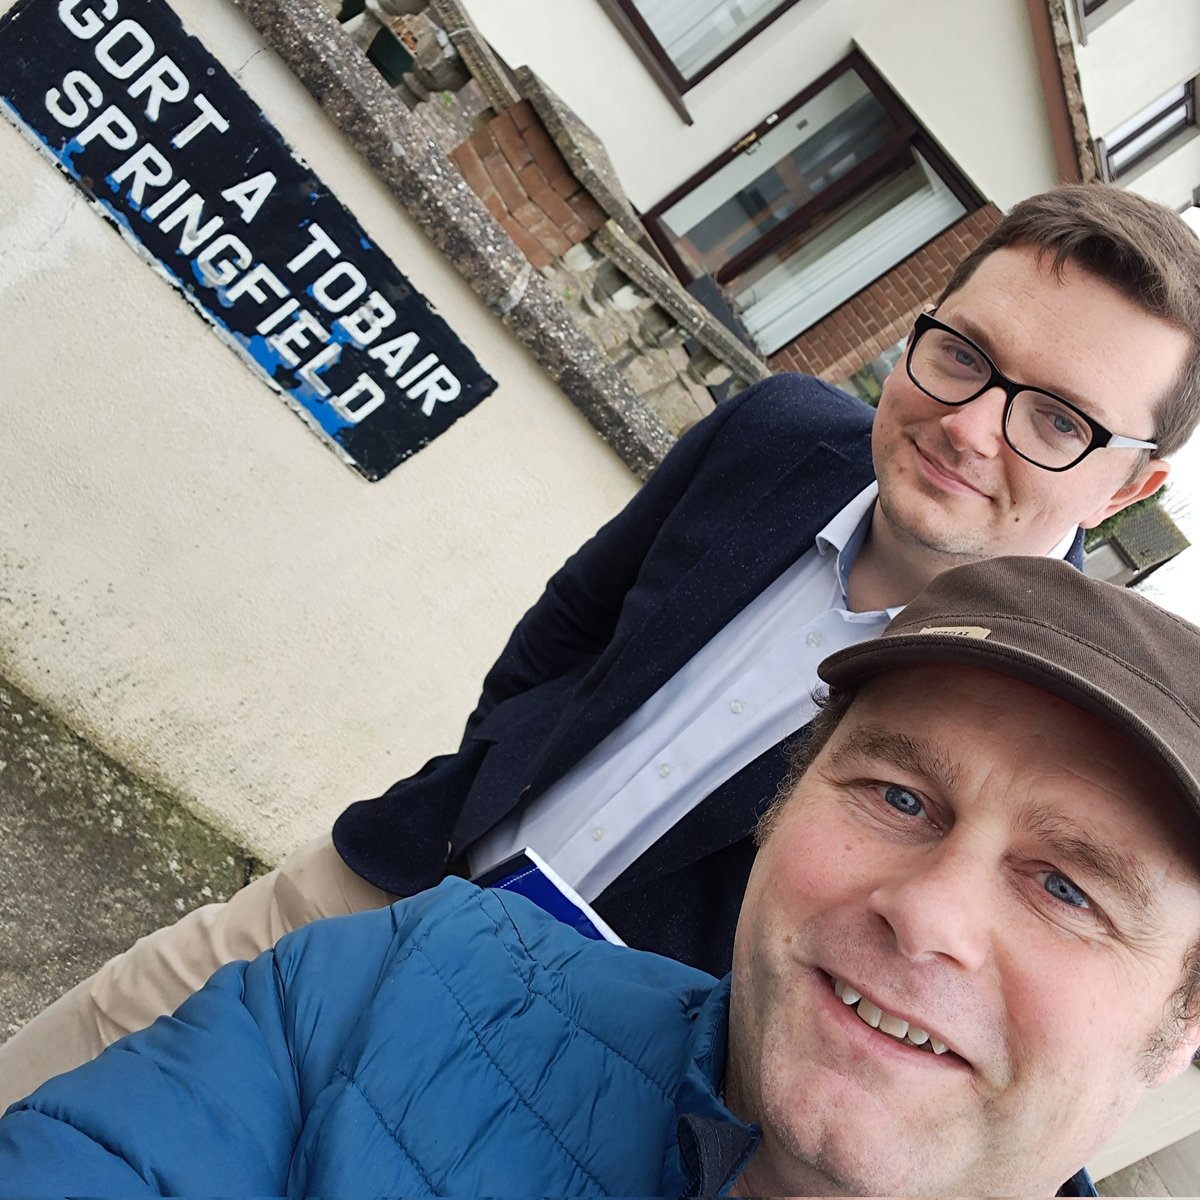 Gíorraíonn beirt bóthar! Really positive canvass around Springfield, #Dungarvan with @ofaolainC, our local election candidate in the area. Críostóir's been doing the groundwork, and it shows on the doors. Good reception for his key issues, public transport and water safety.